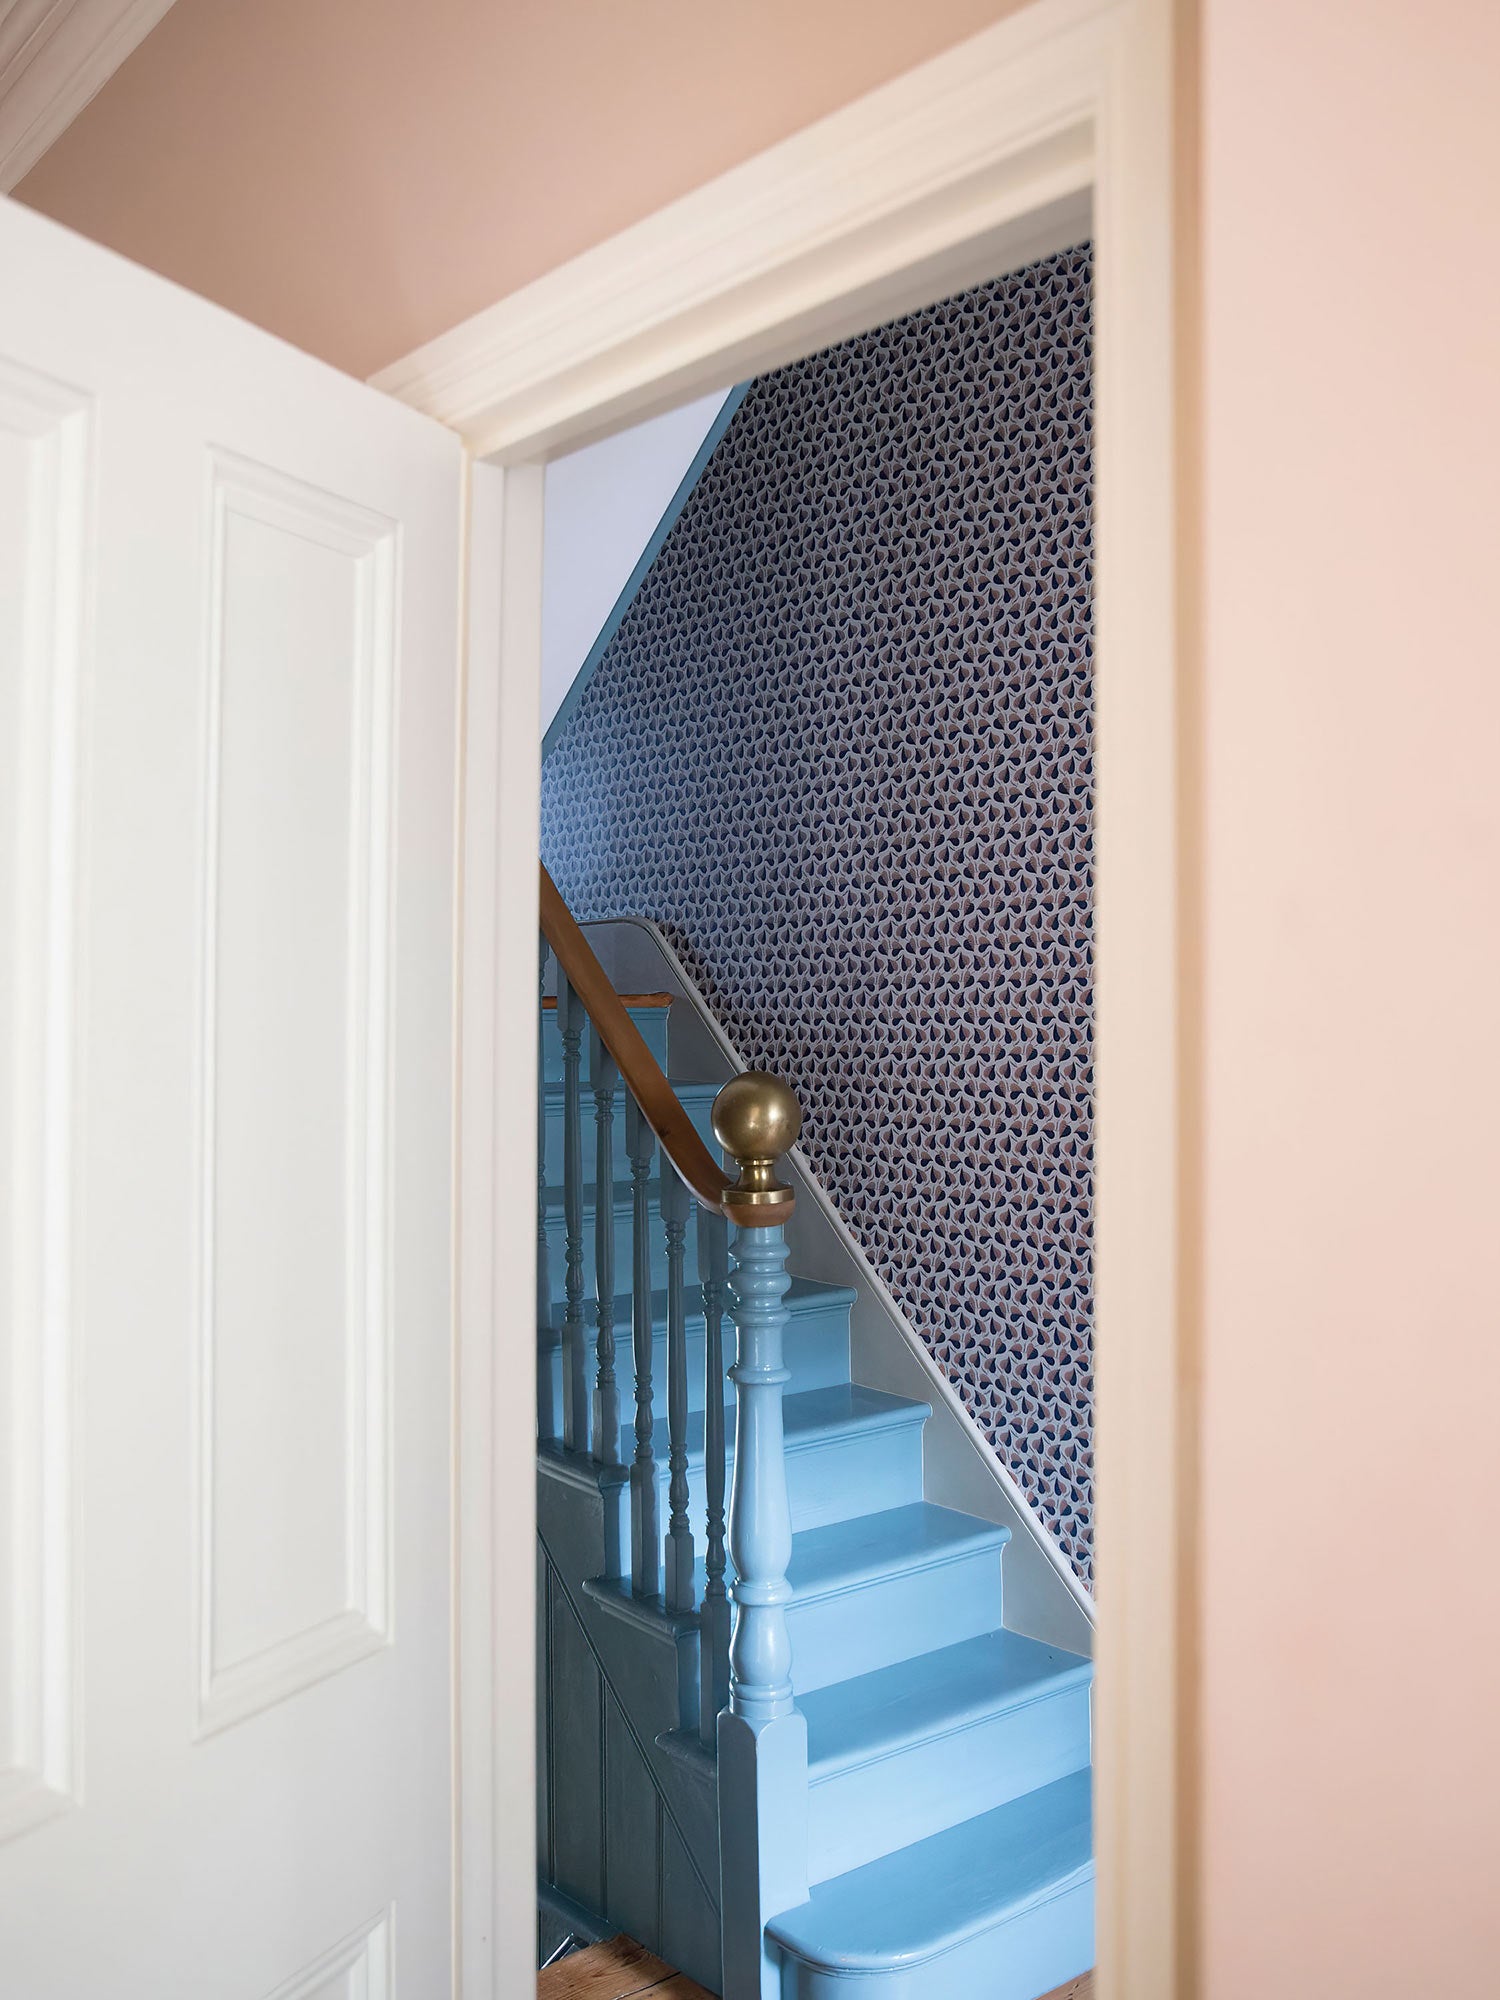 A love letter to repetition in nature, this pink and blue leaf design by William Kilburn dates from 1800, pictured here by blue painted staircase in Victorian house